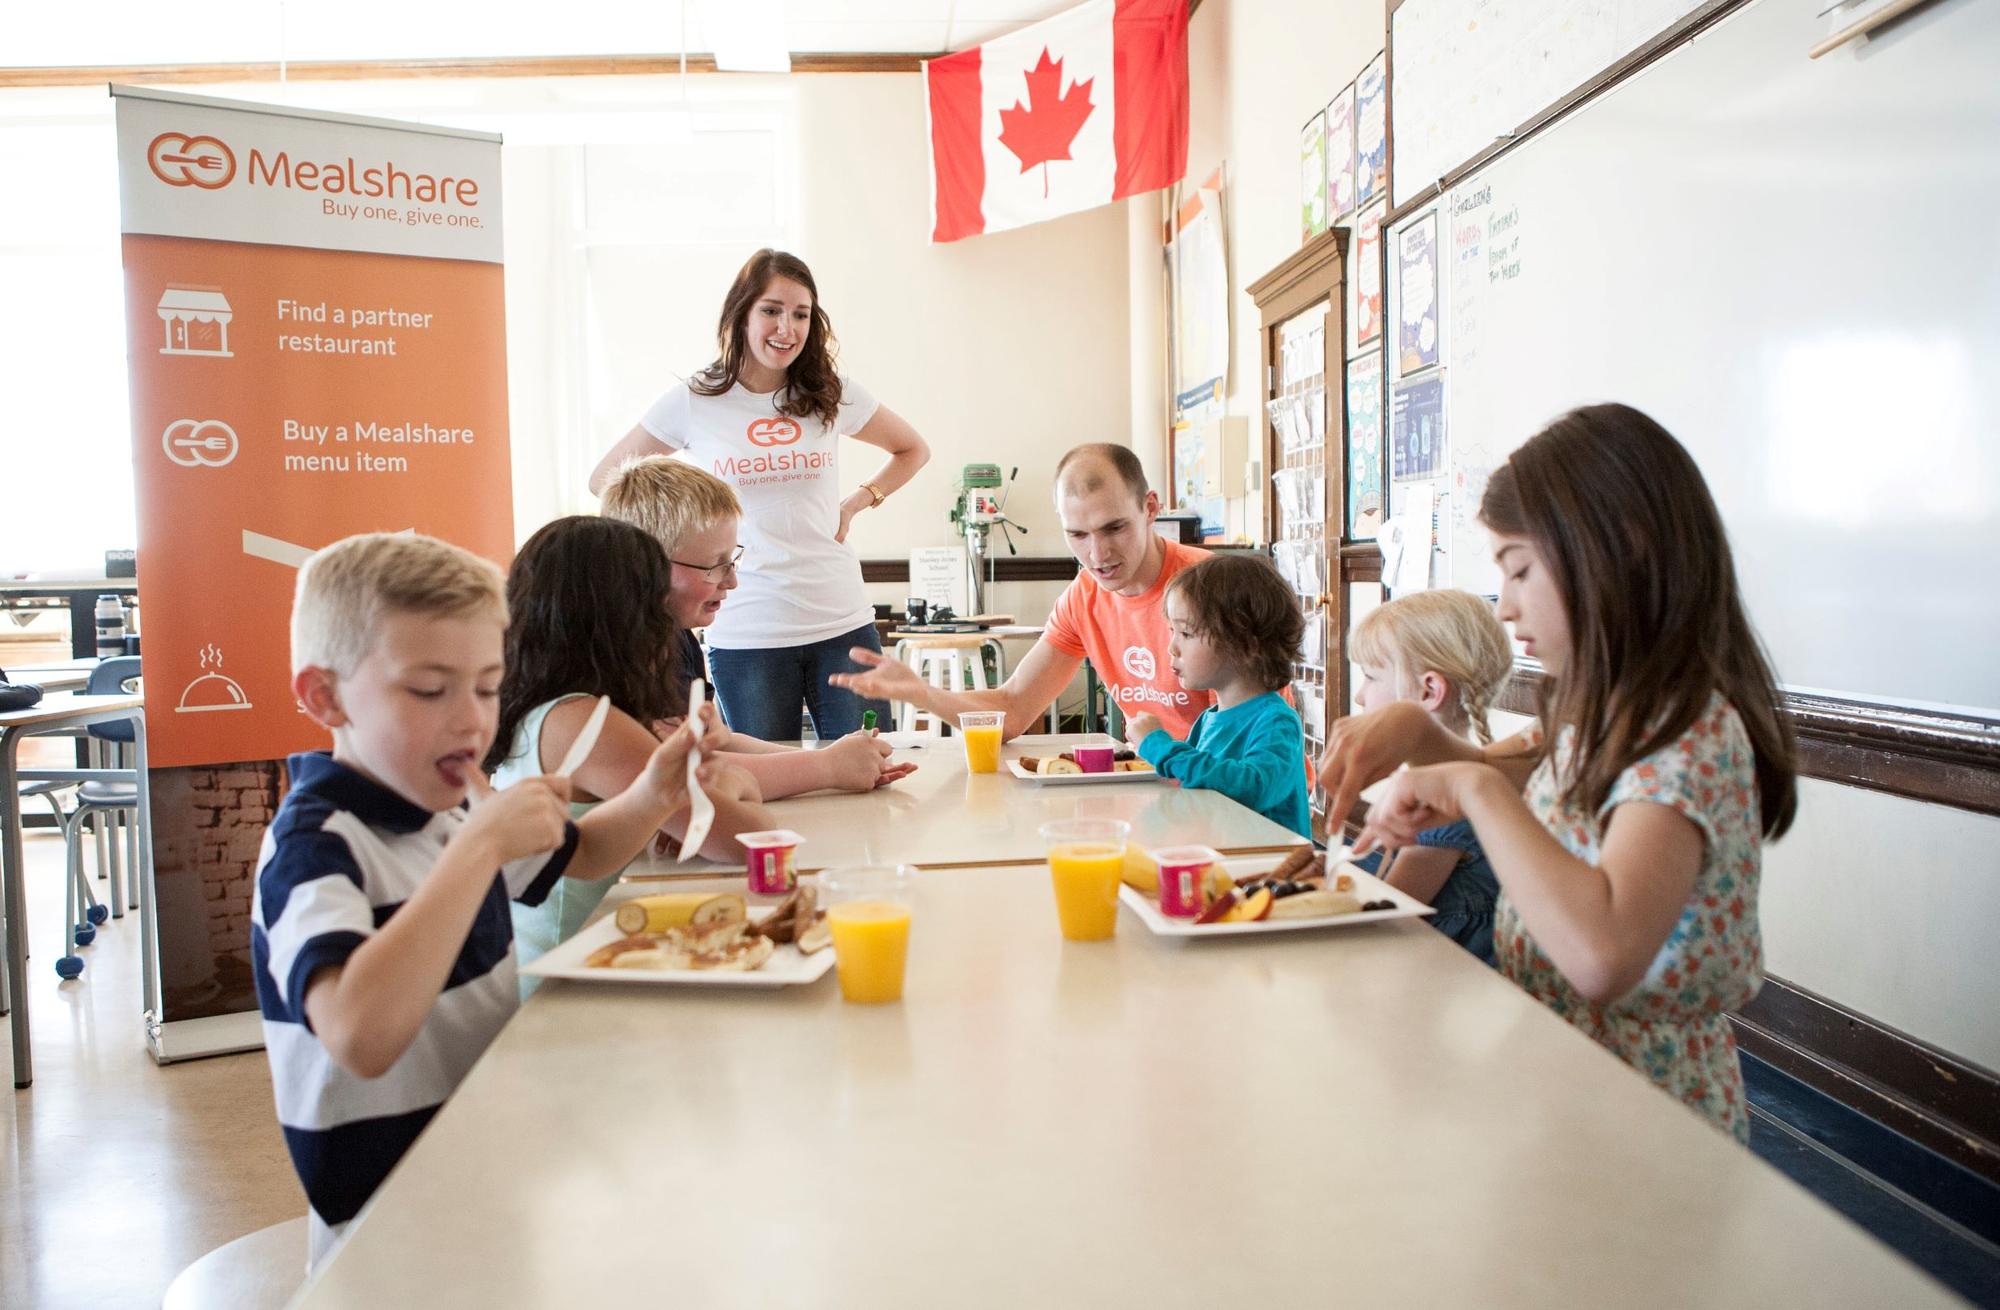 Mealshare and A & W Canada program will help provide meals for local youth in need